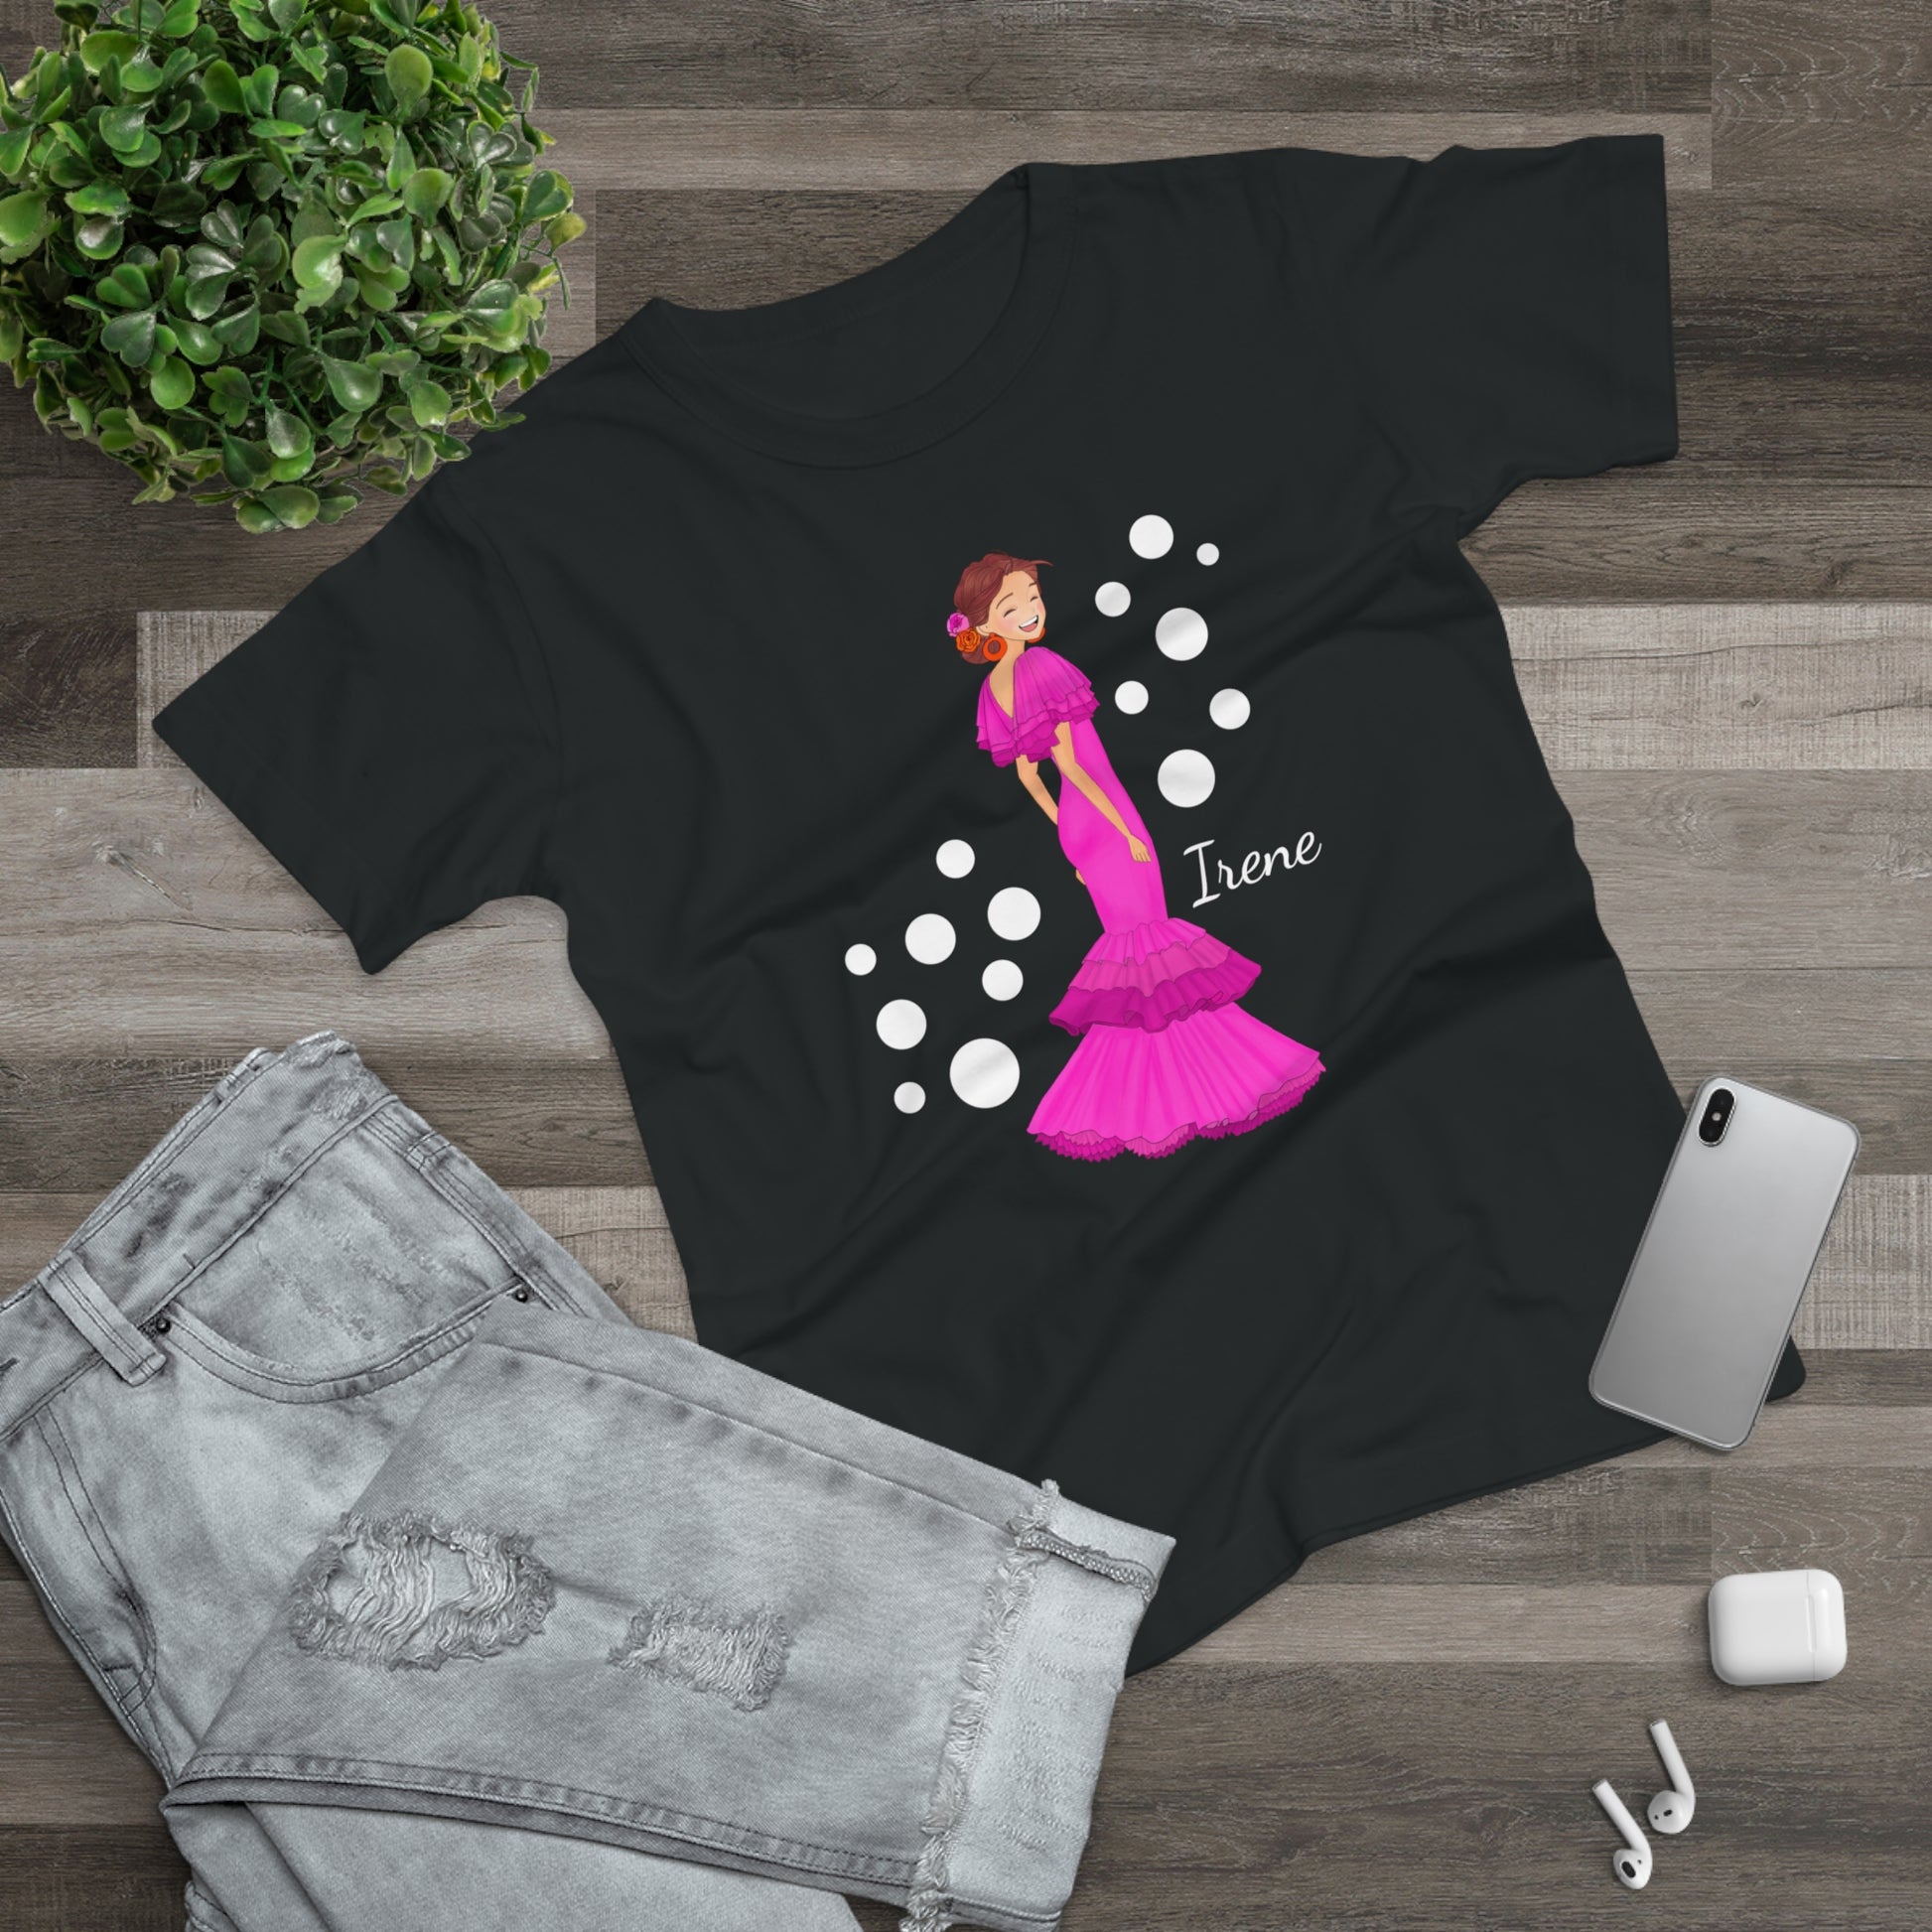 a t - shirt with a woman in a pink dress